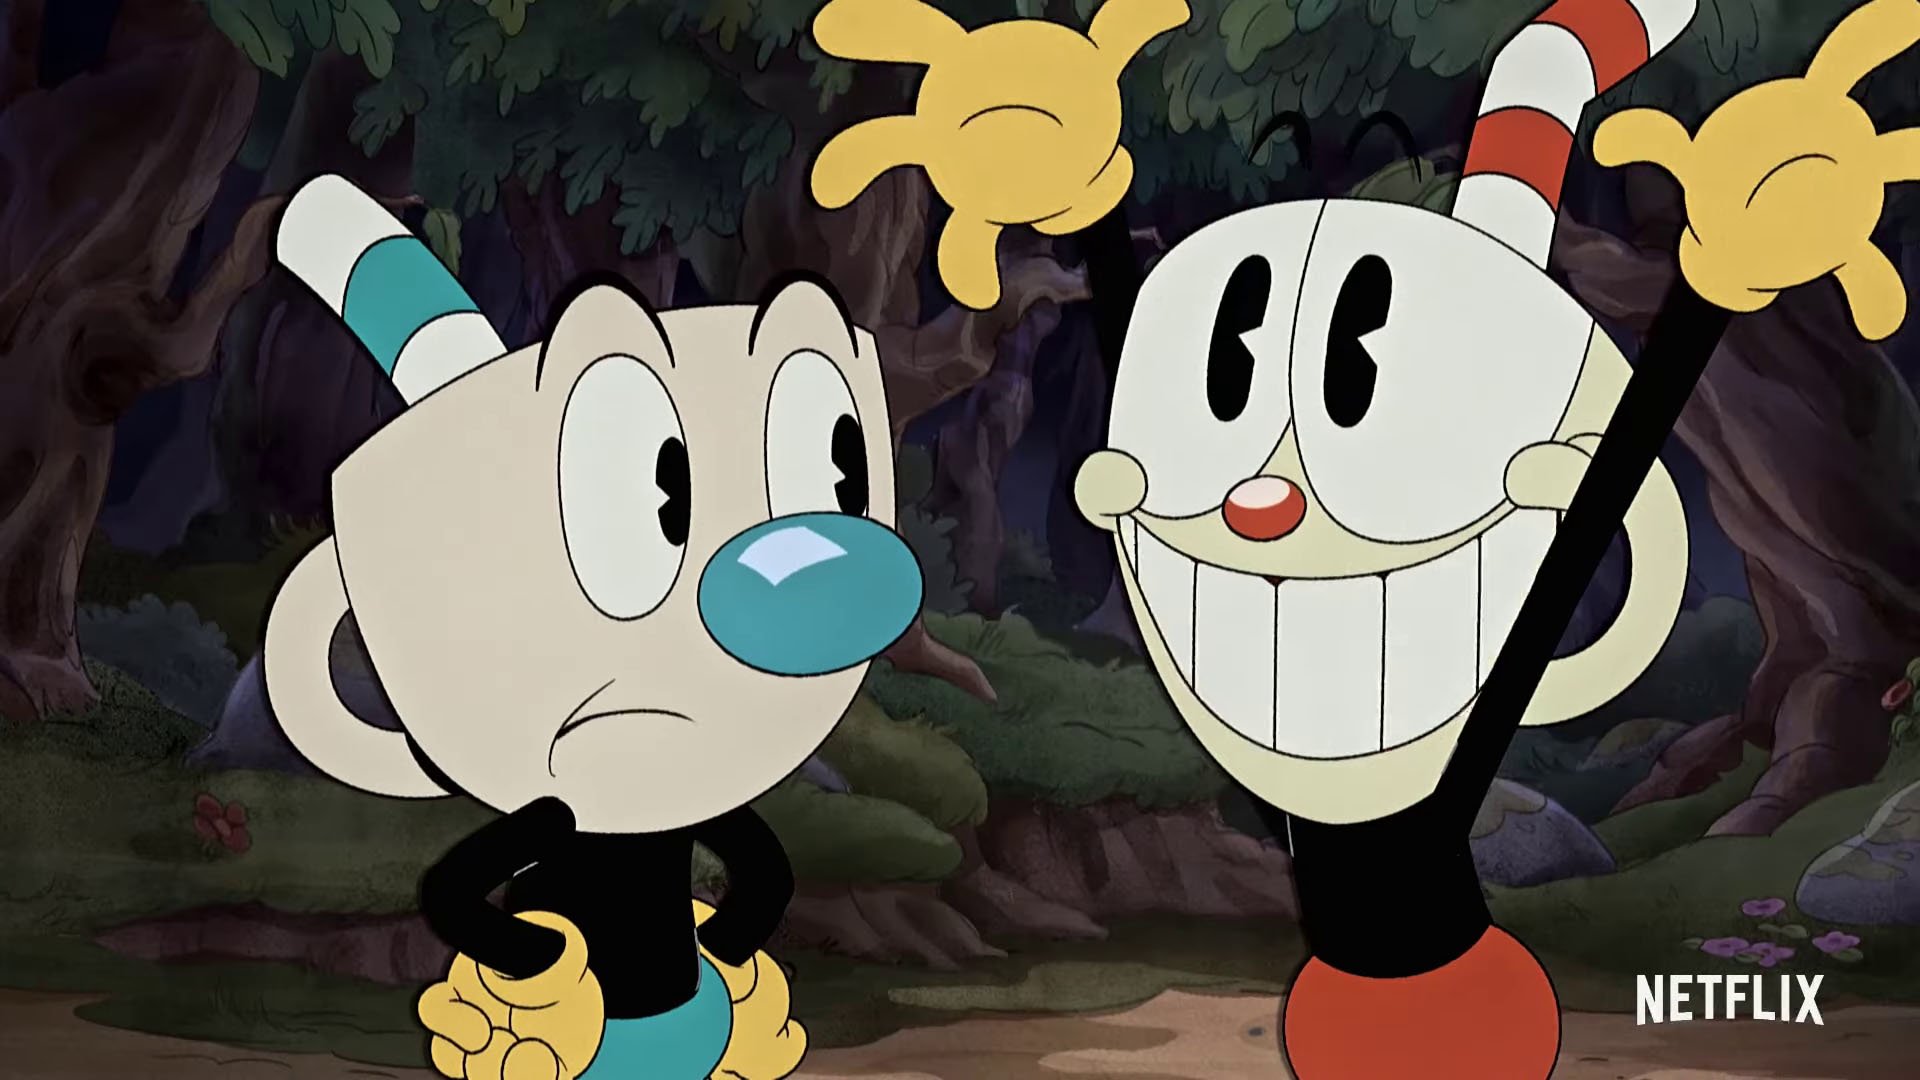 The Cuphead Show! Starts February 18th On Netflix, New Trailer